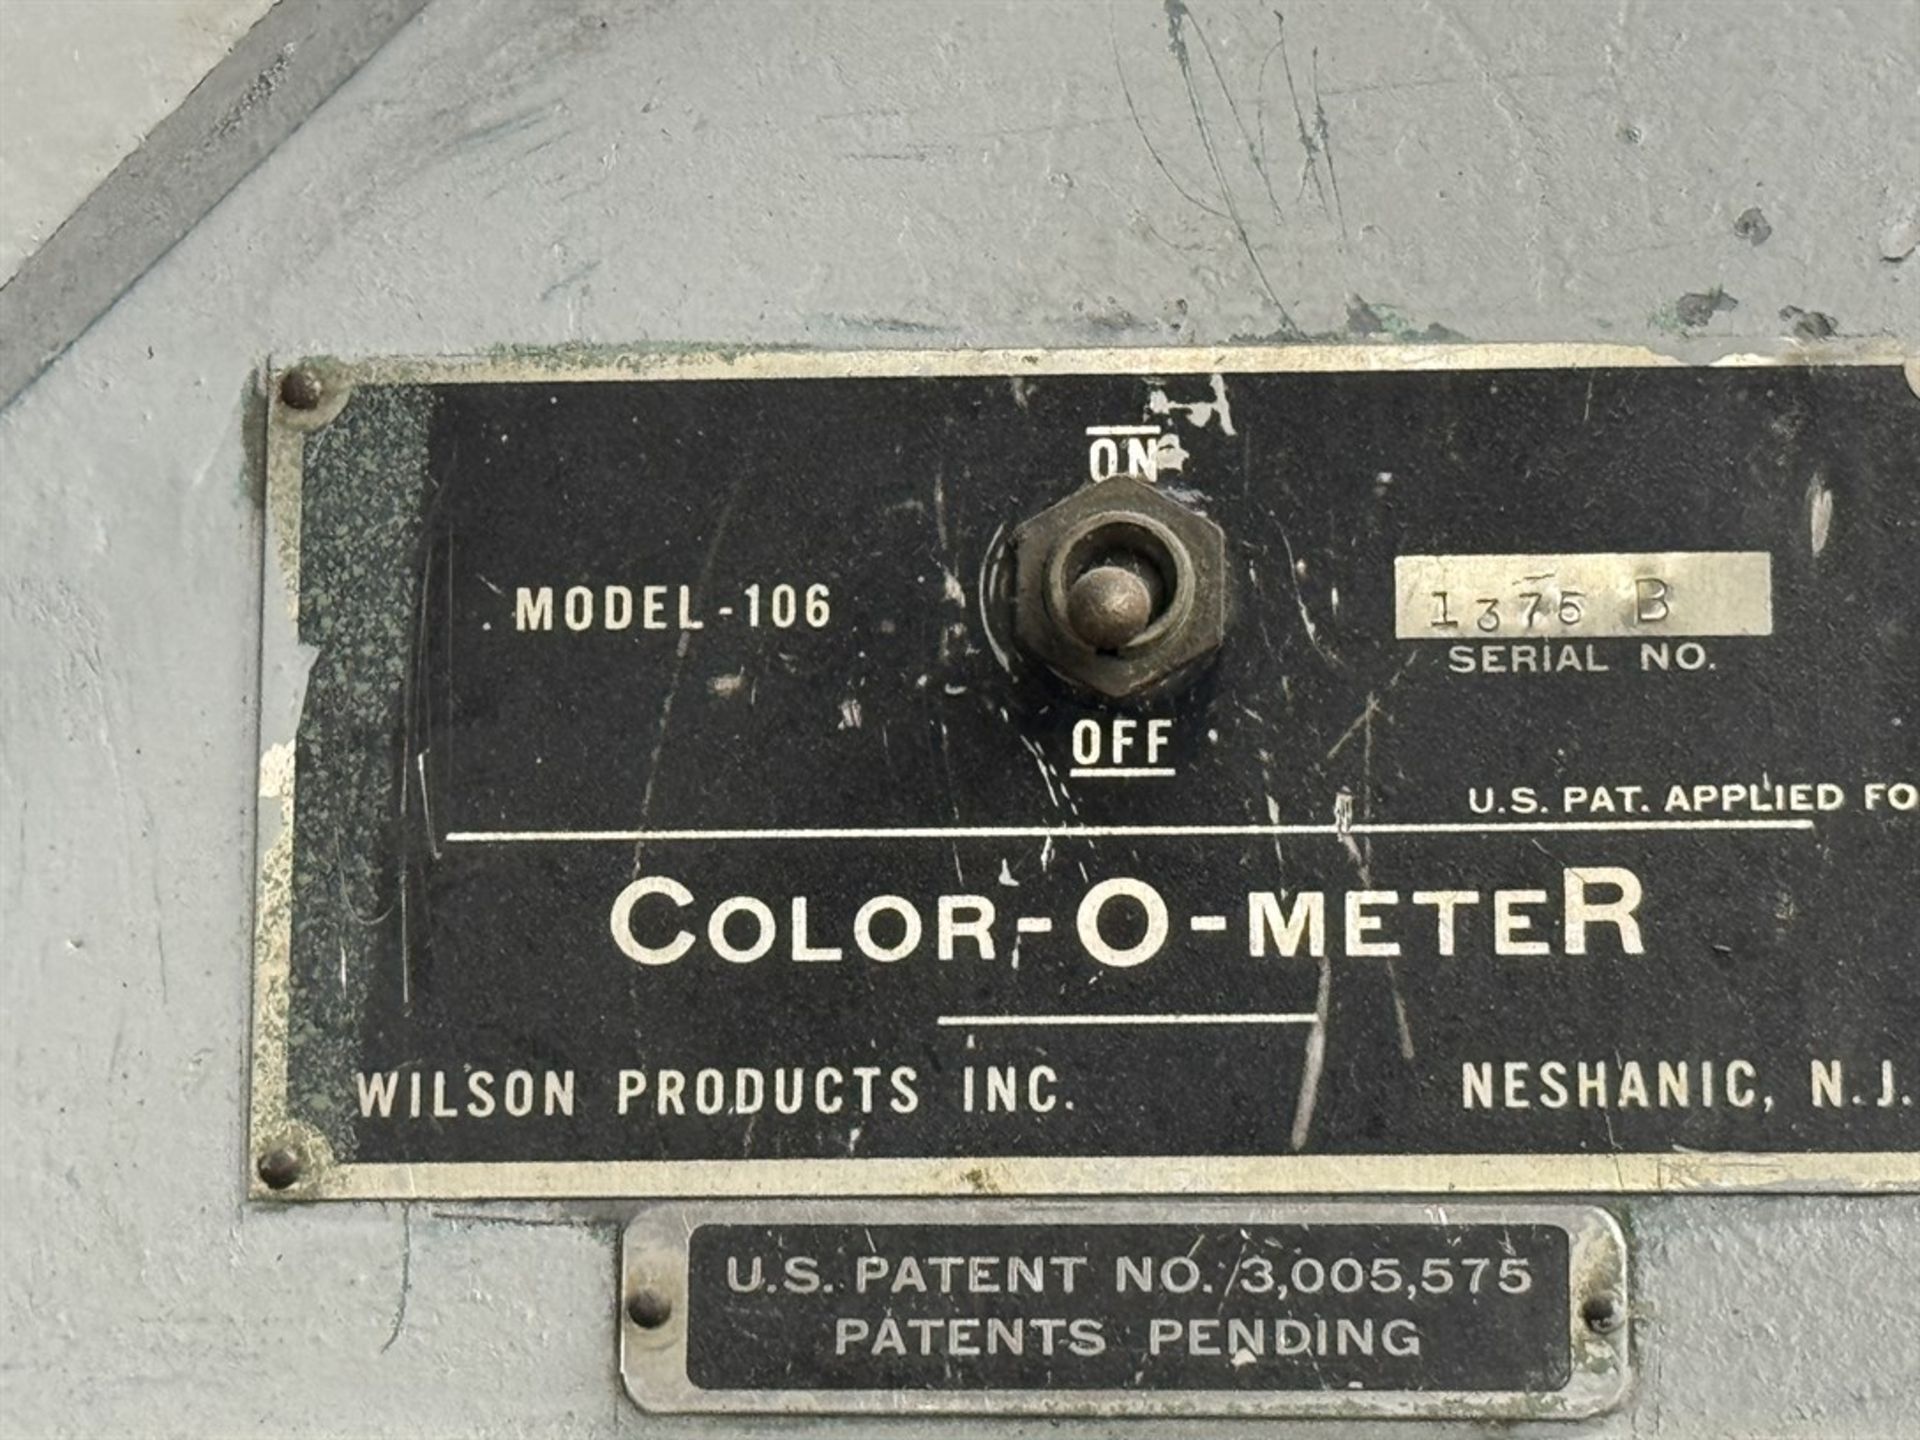 Jacket Extrusion Line (#2)-WILSON 106 Color Meter, s/n 1375B - Image 3 of 3